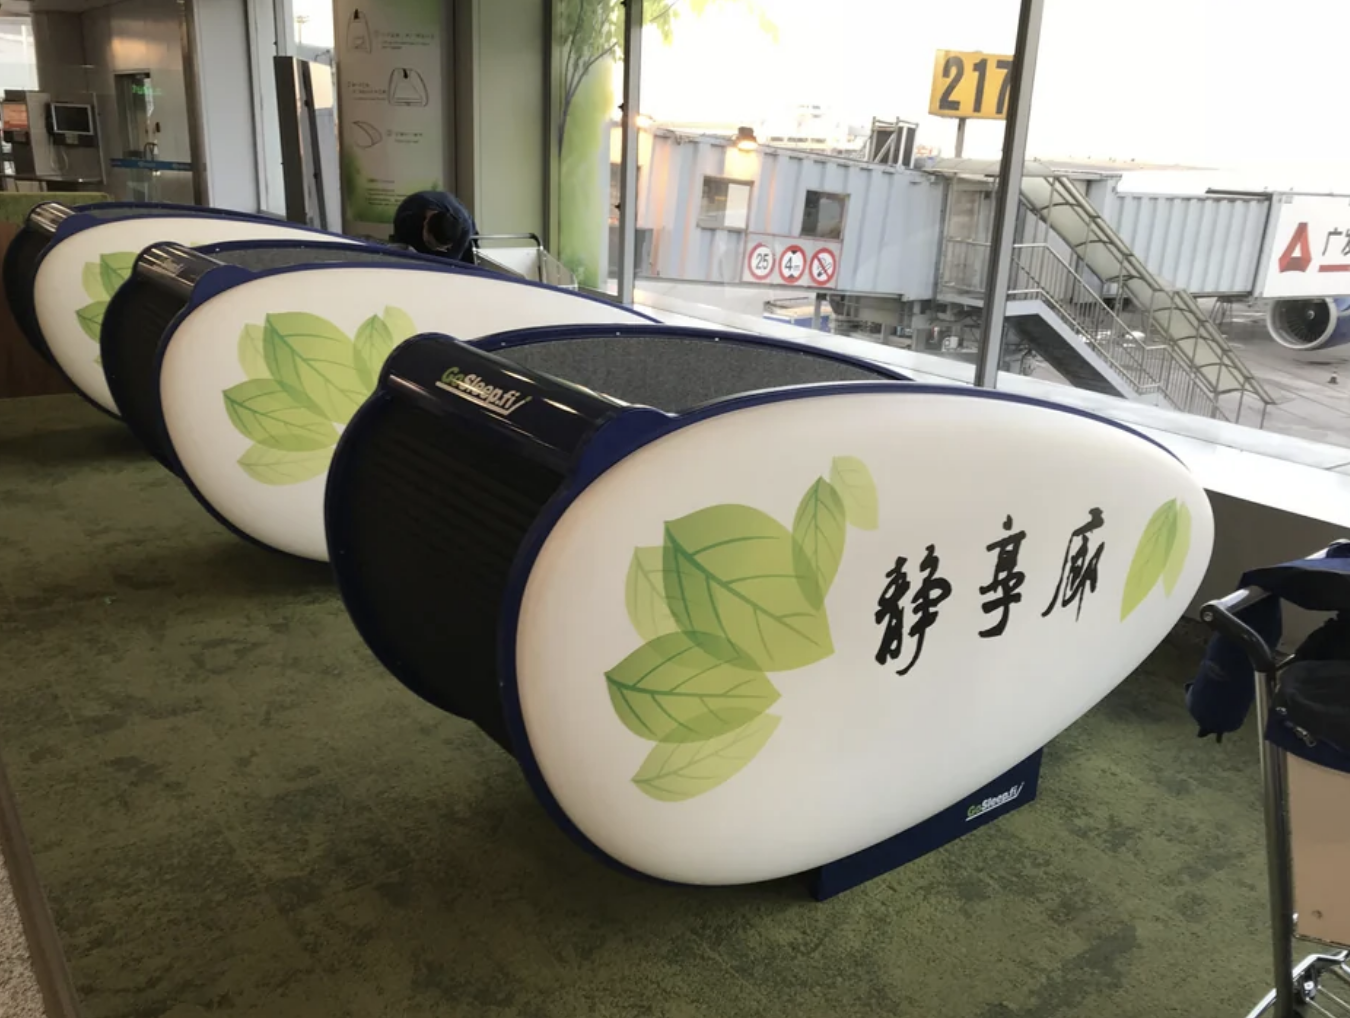 Sleep pods in the airport